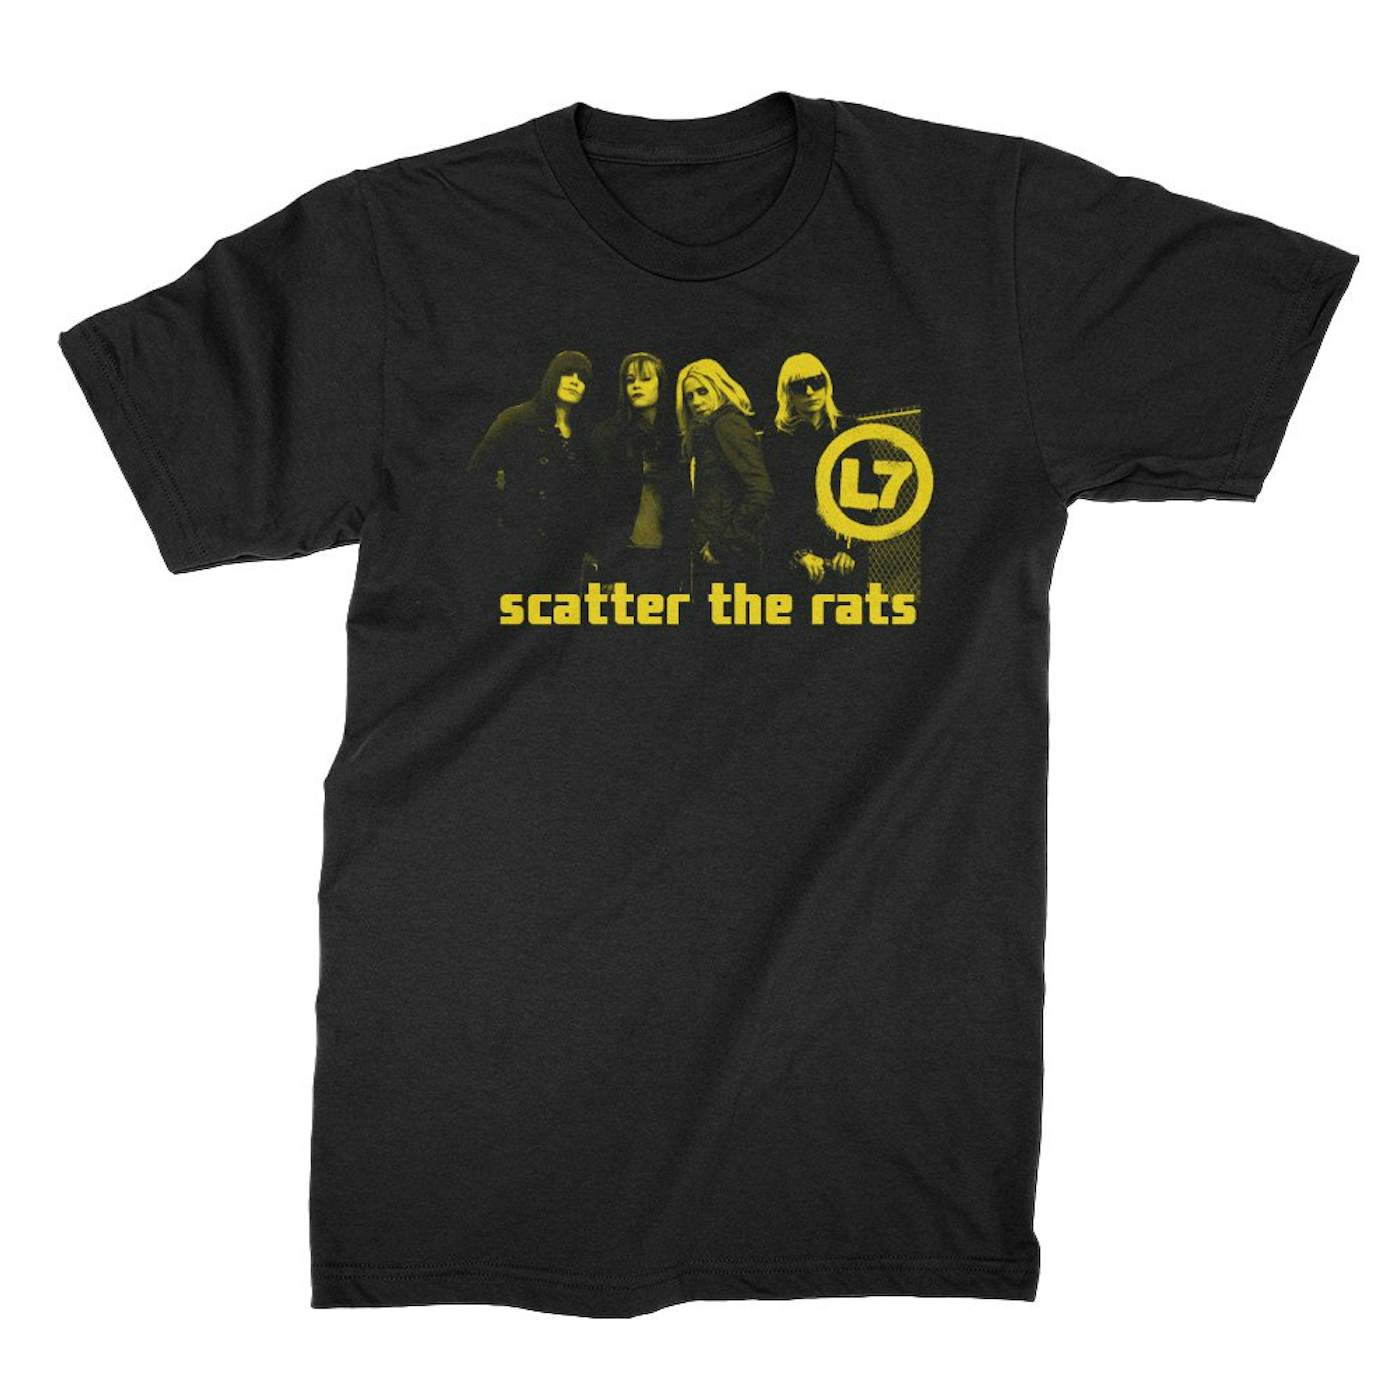 L7 Scatter the Rats Photo Tee (Black)